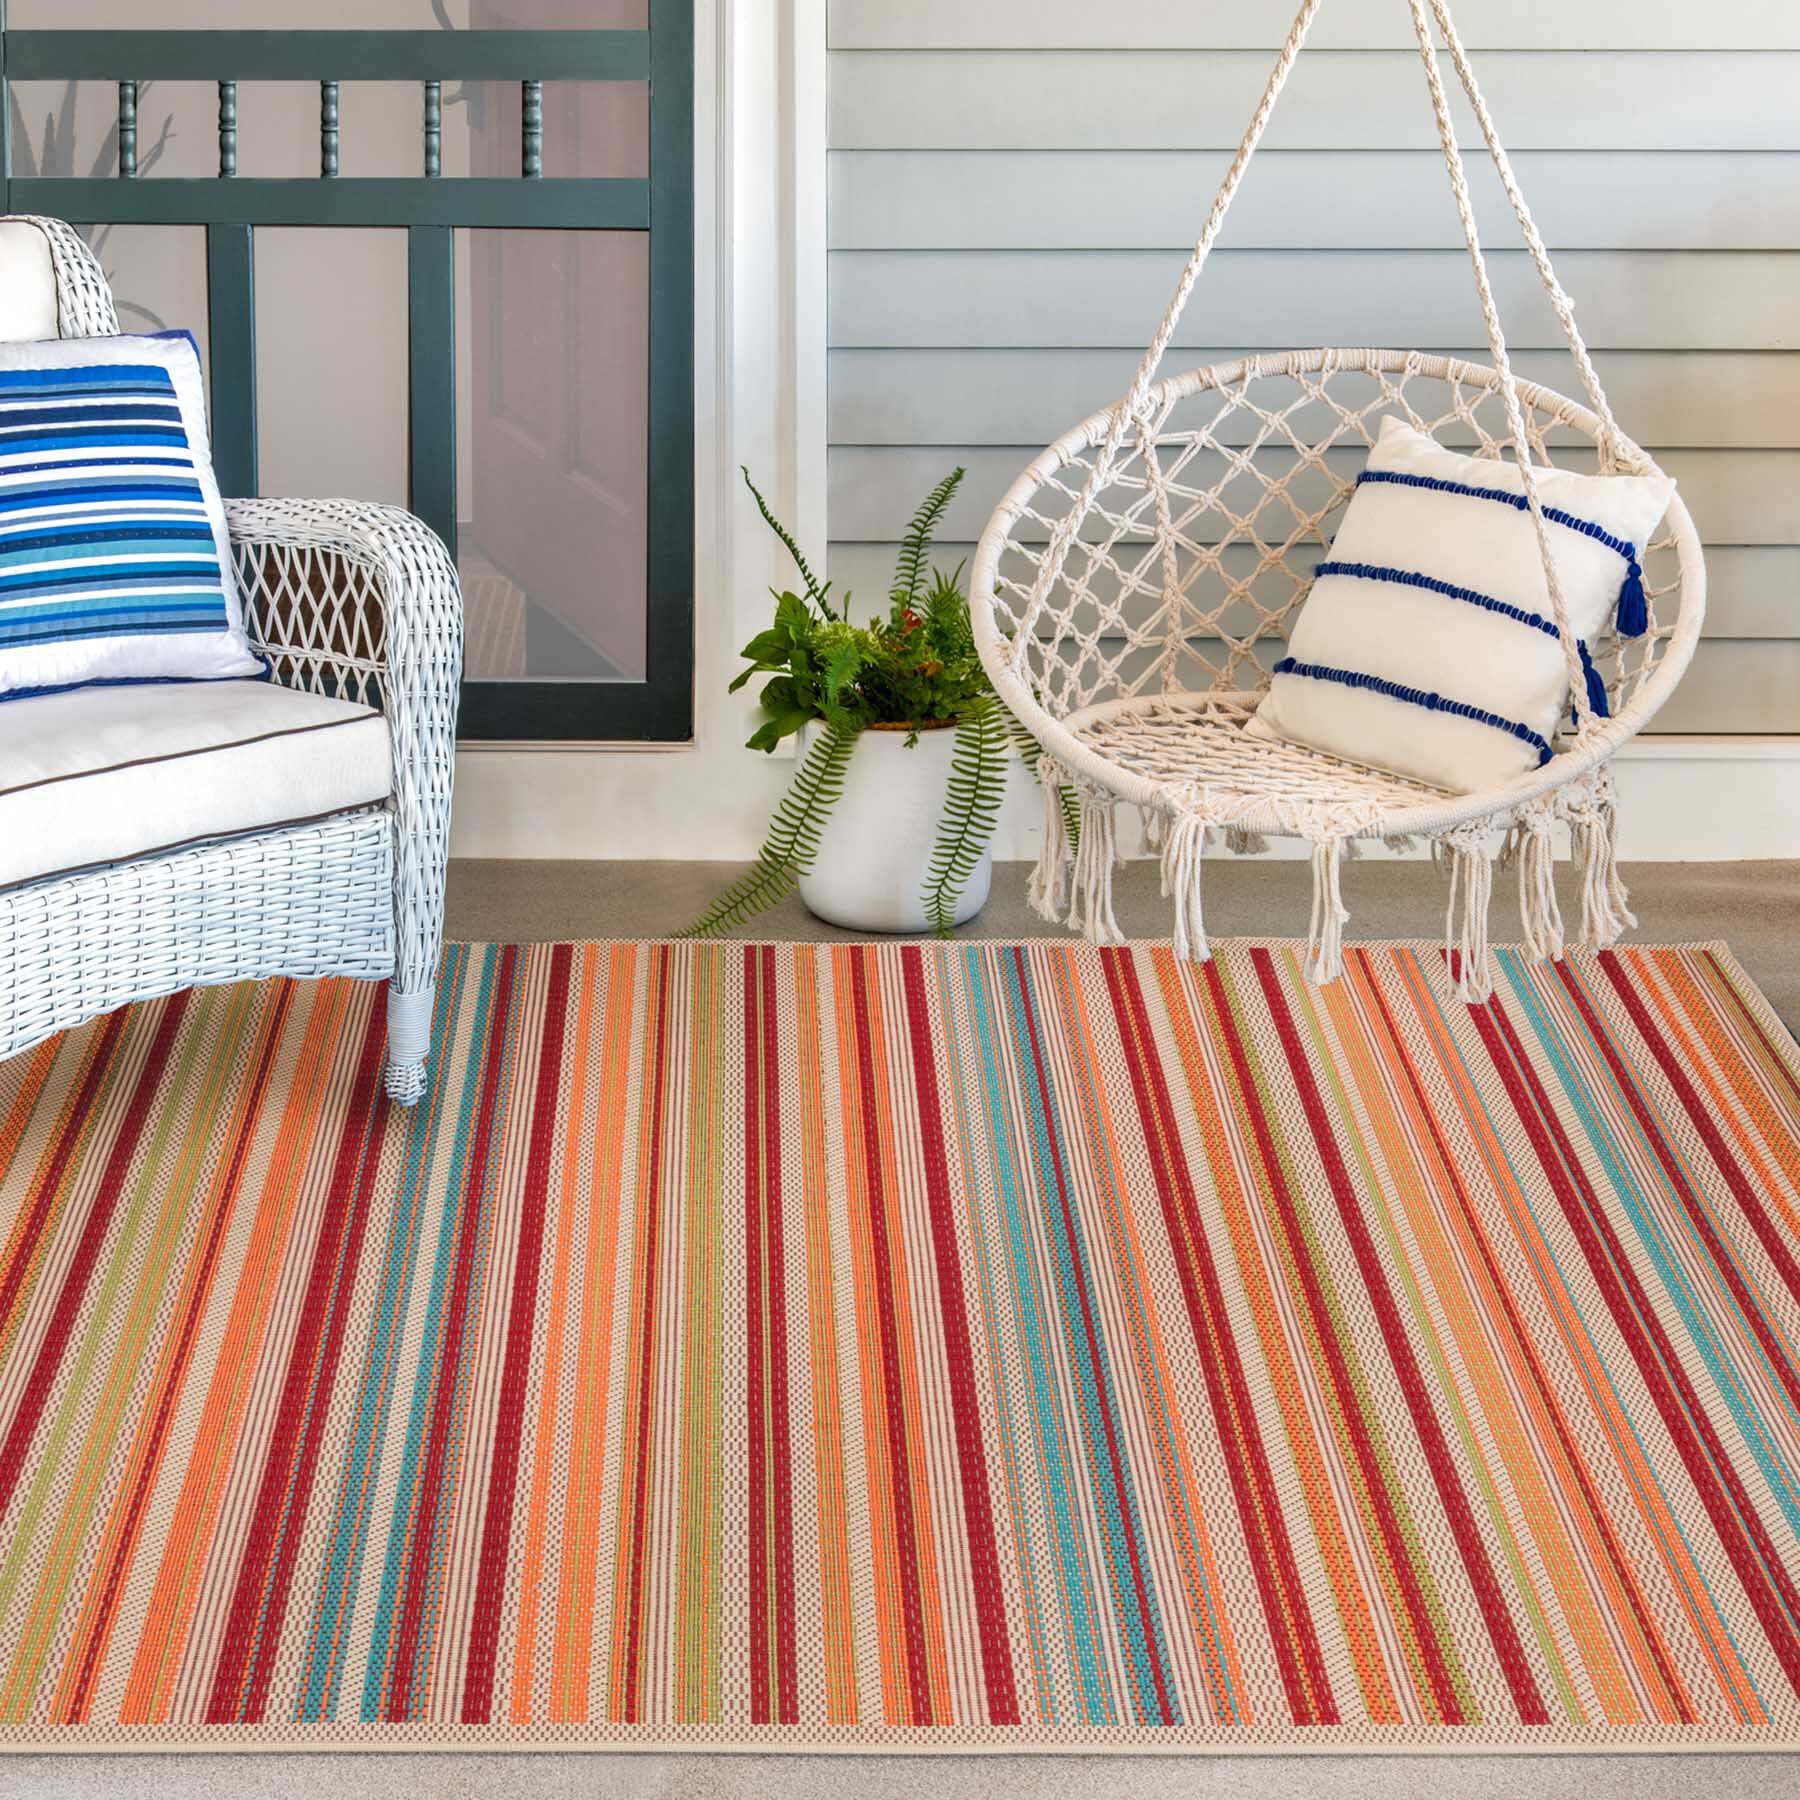 (E309) Scope Multicolor Striped Woven Indoor & Outdoor Area Rug, 5x7 - nybusiness